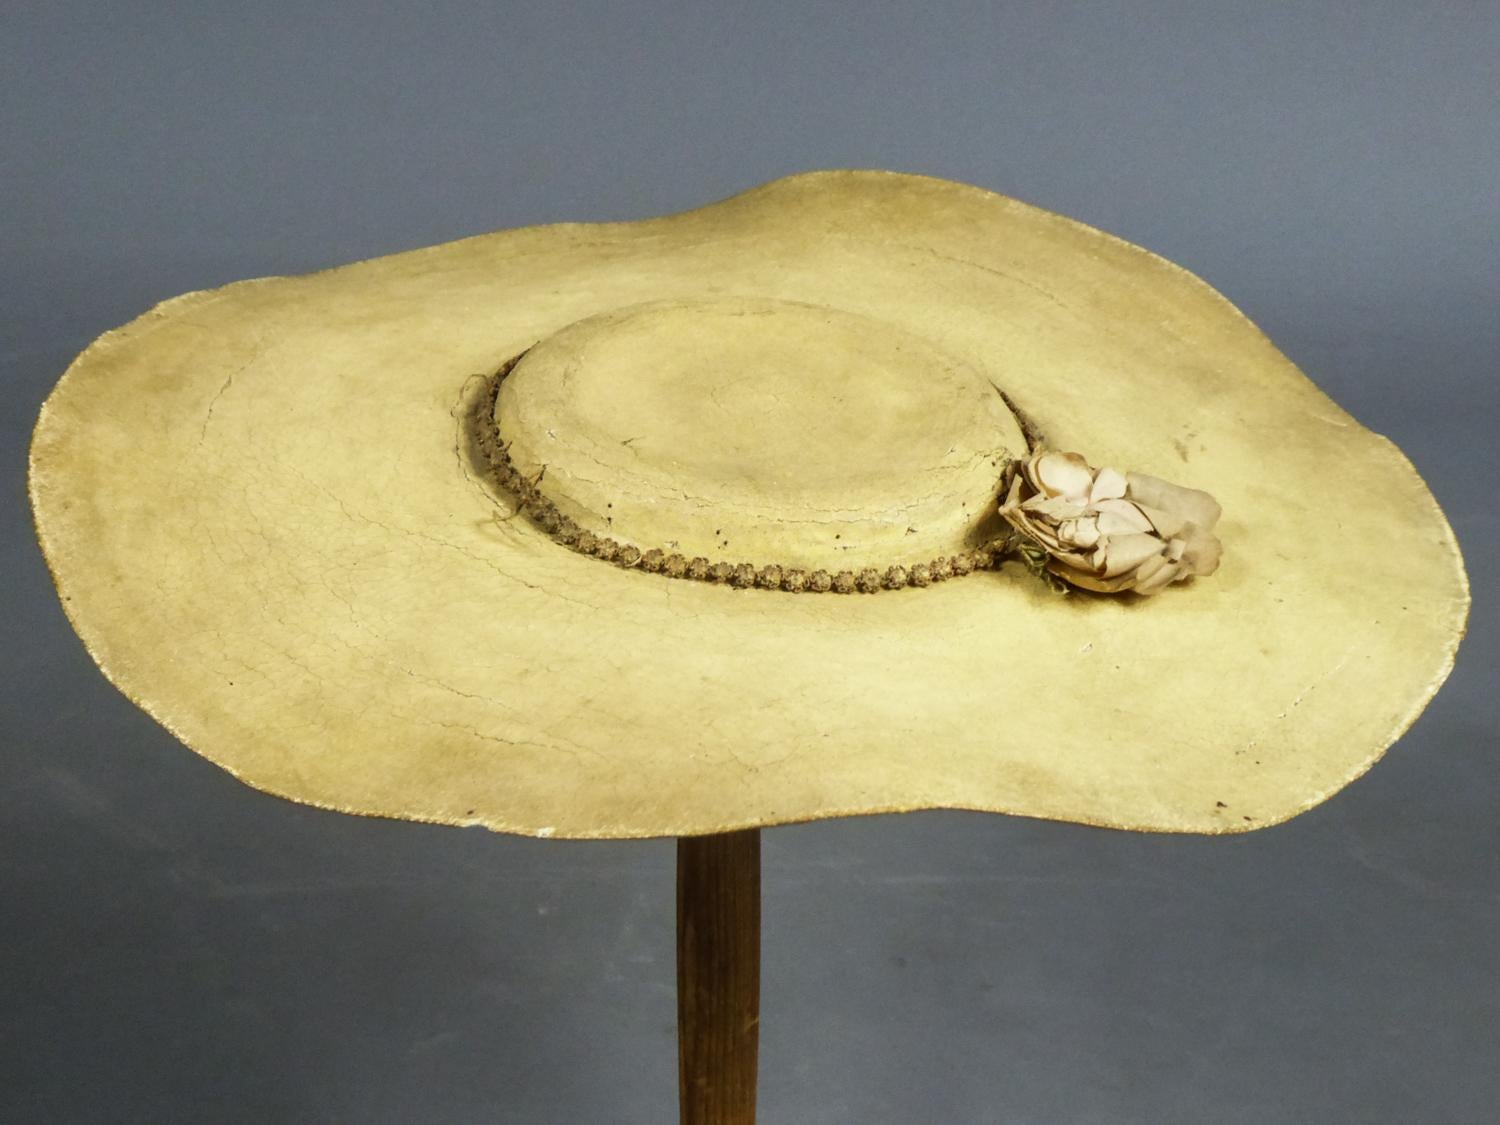 Women's A Rare Collectible Painted Straw Bergère or Milkmaid’s Hat Circa 1730-1780